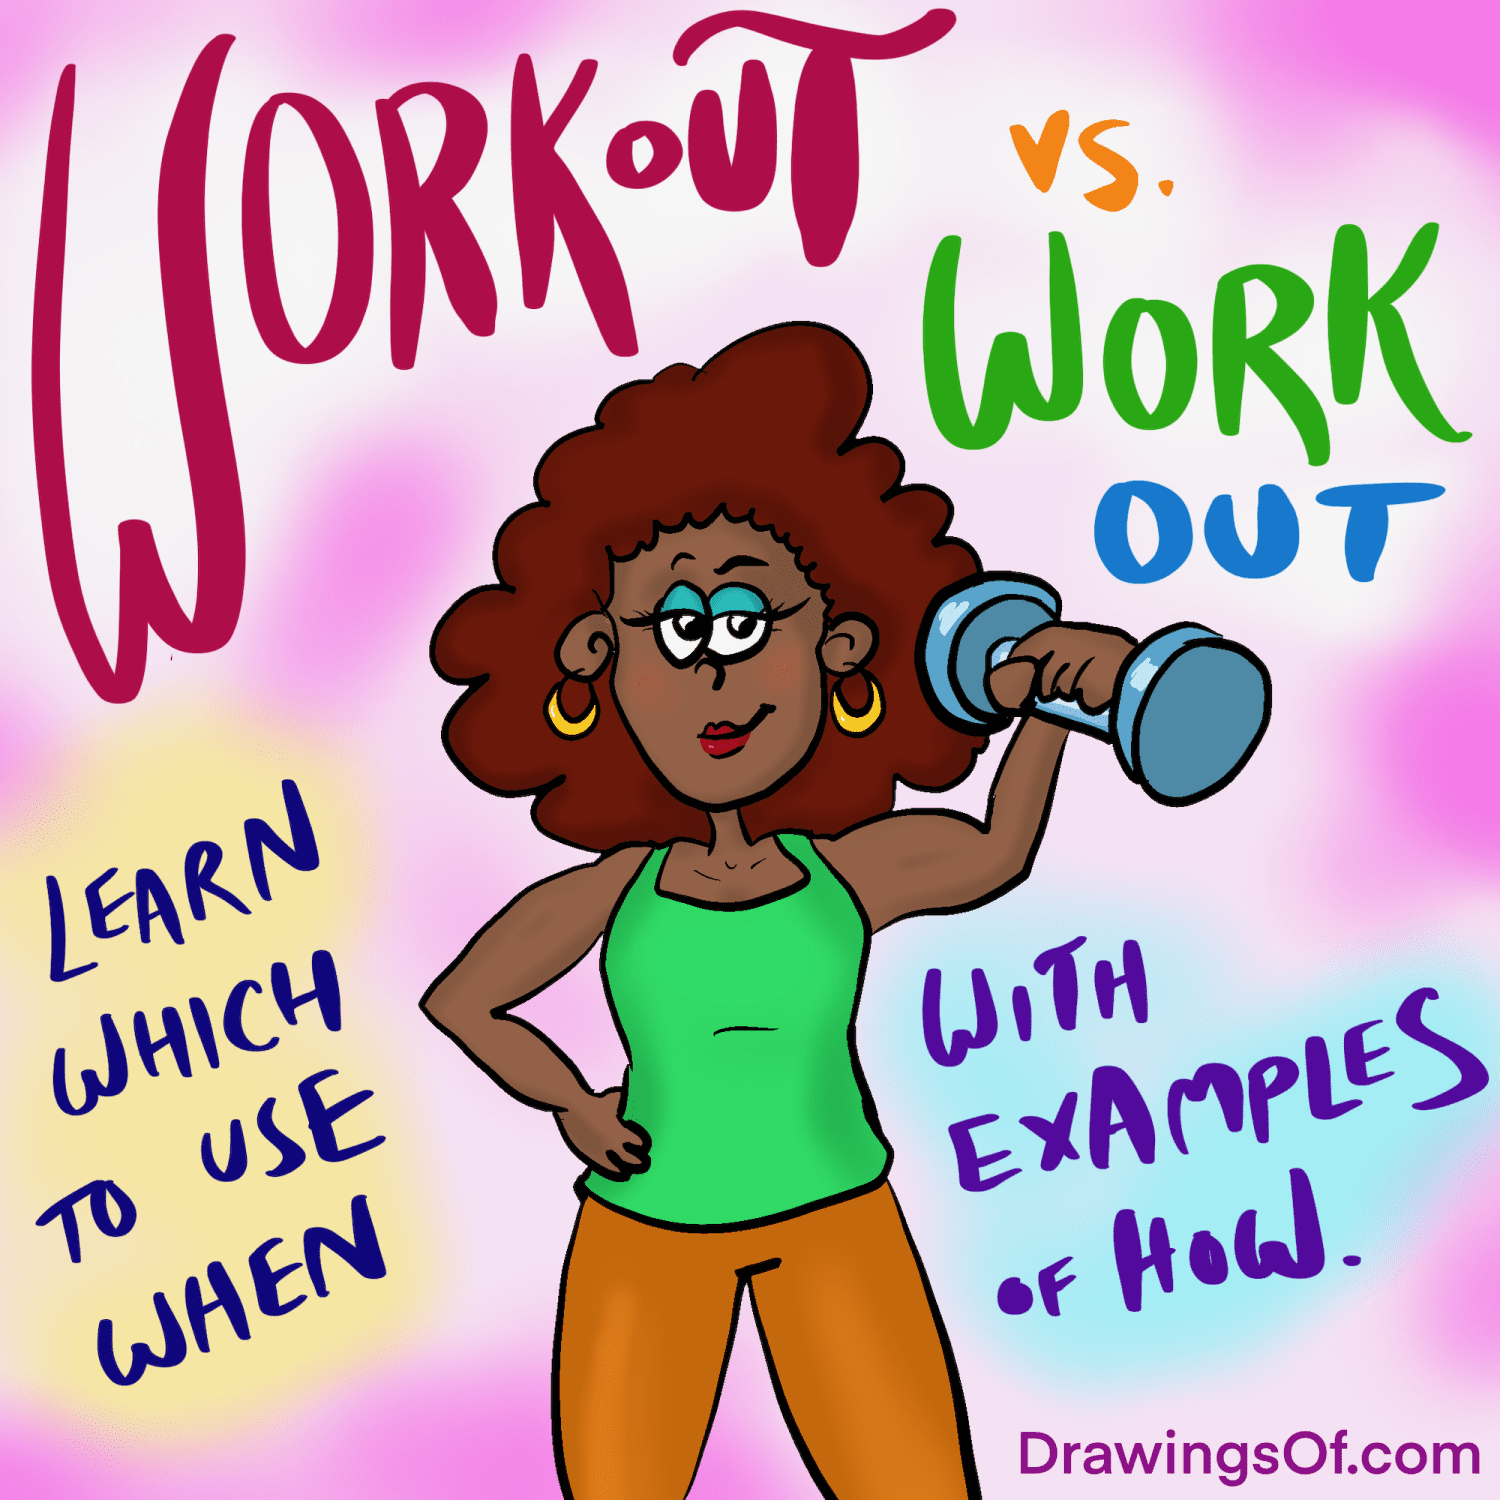 Work out or workout